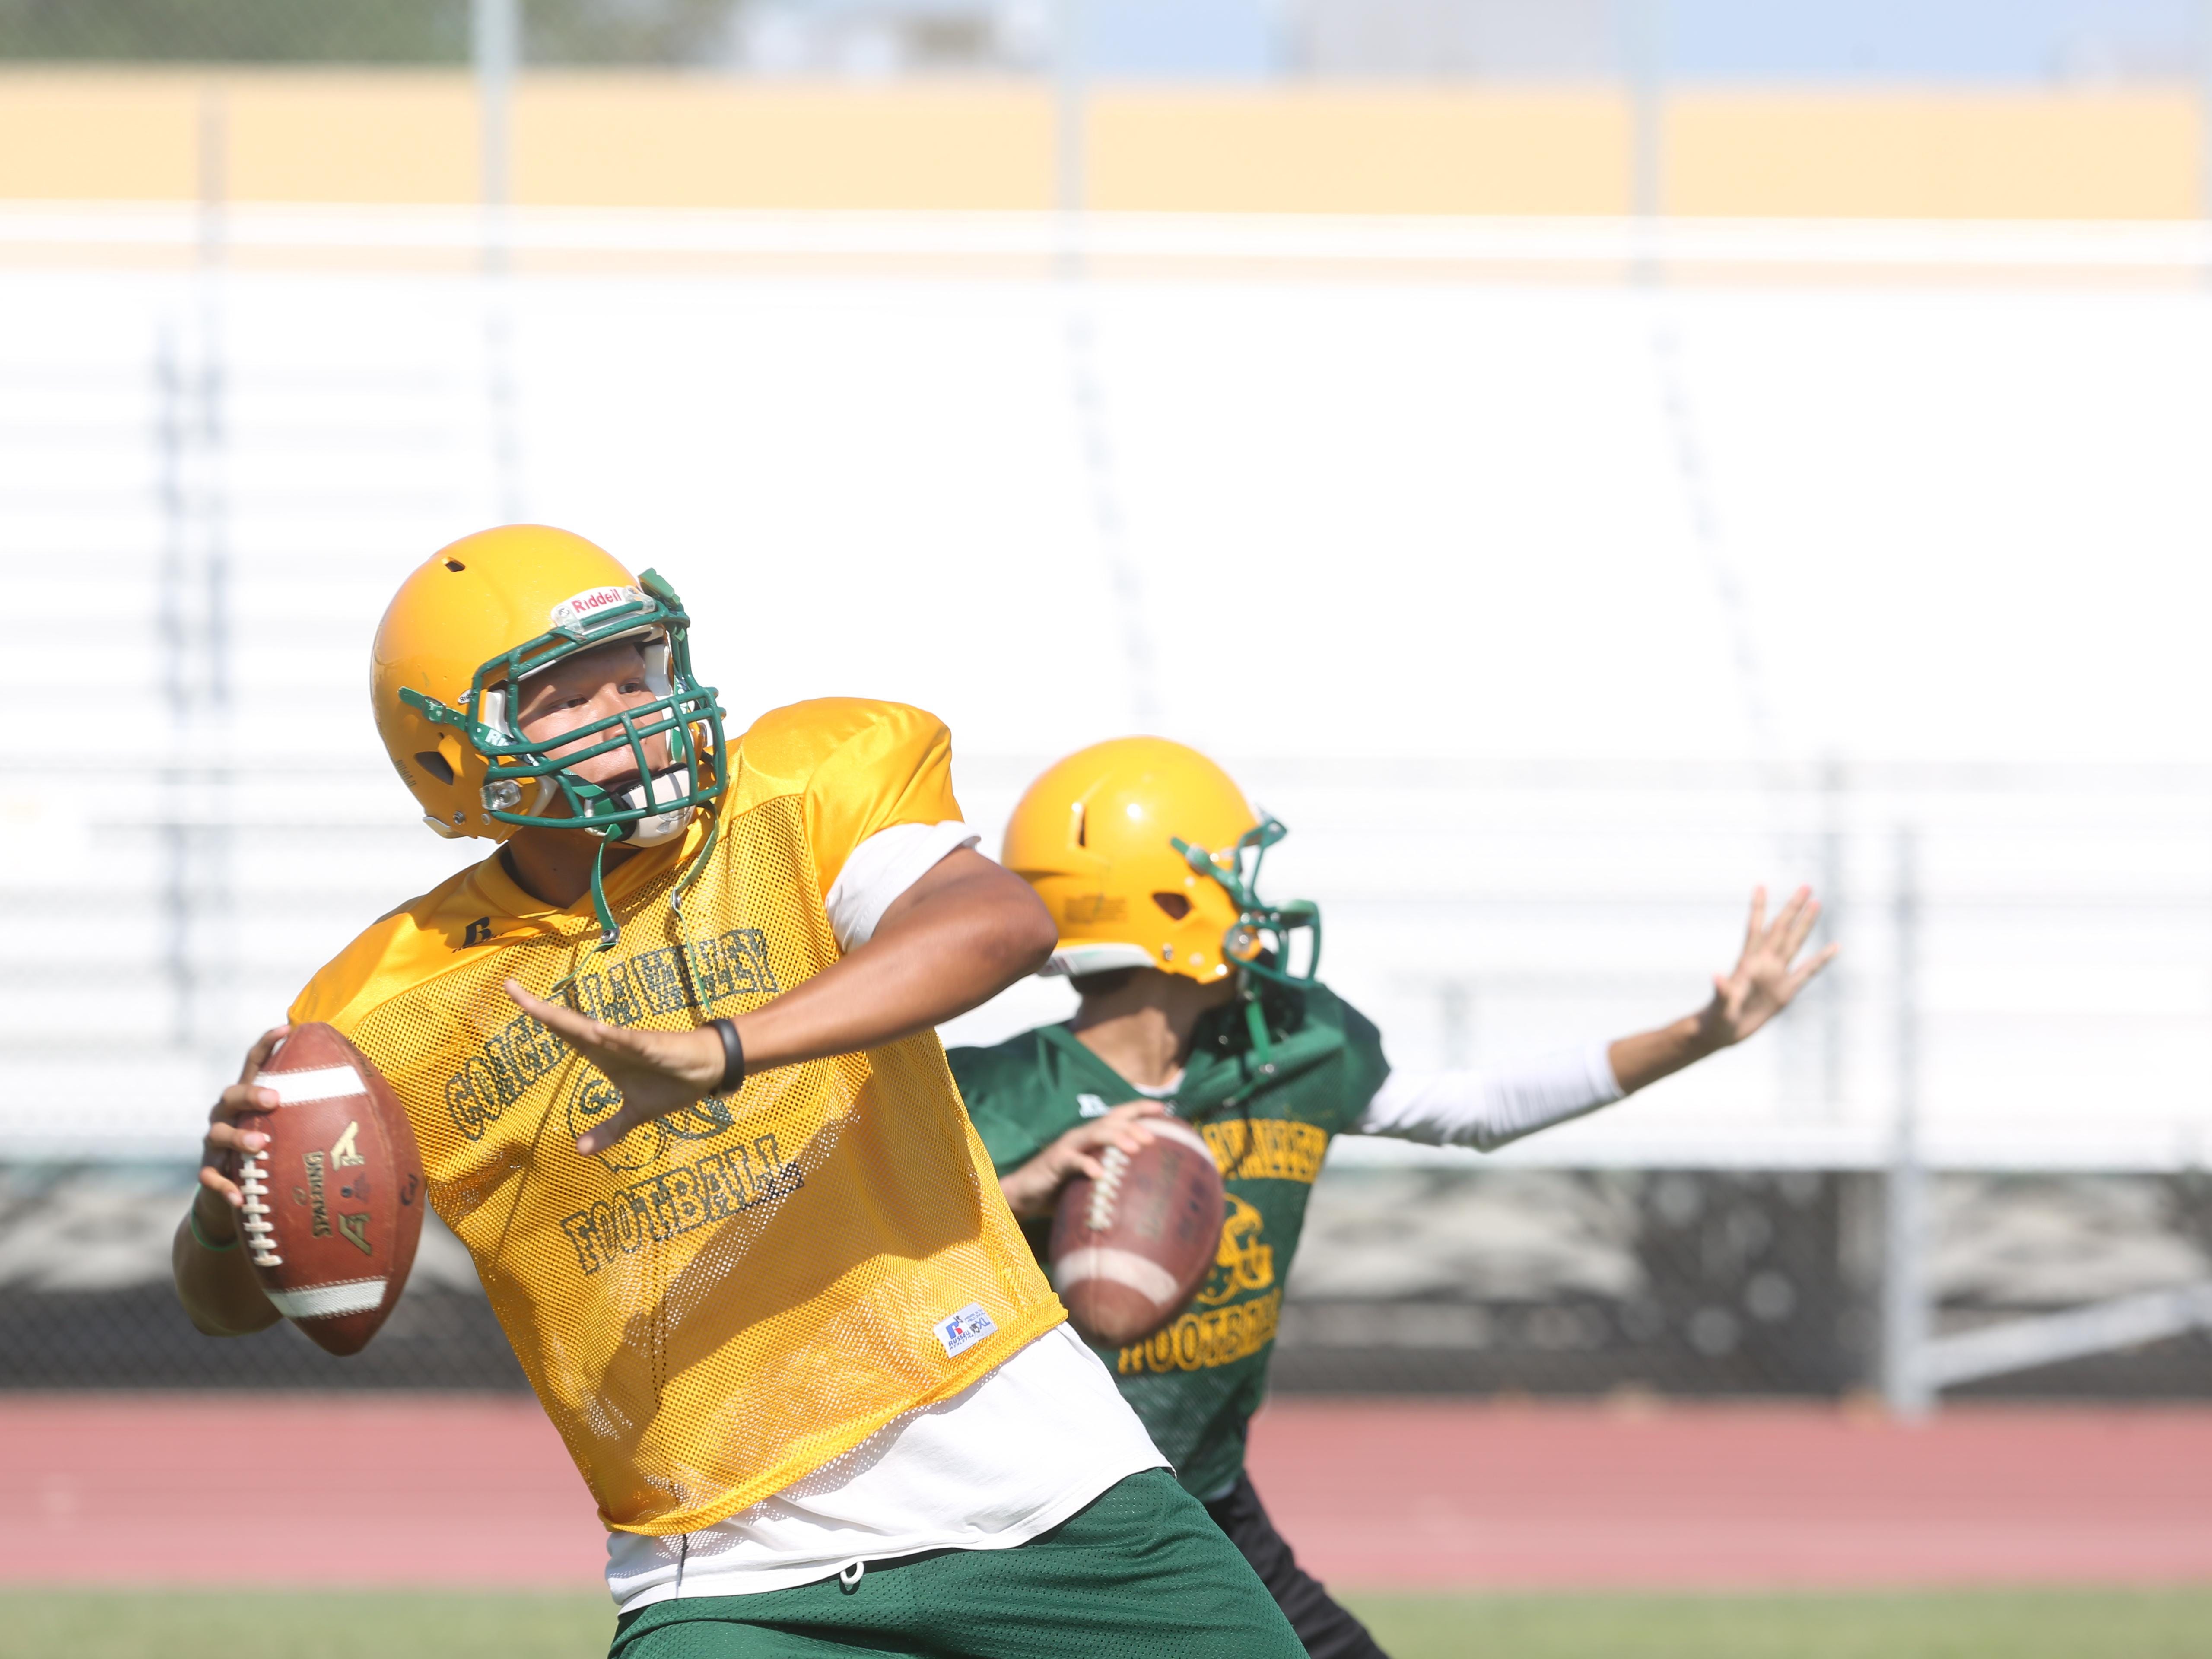 Coachella Valley senior quarterback Darius Hulsey throws during a recent practice. Hulsey threw for 3,206 yards and 29 touchdowns in 10 games last season.